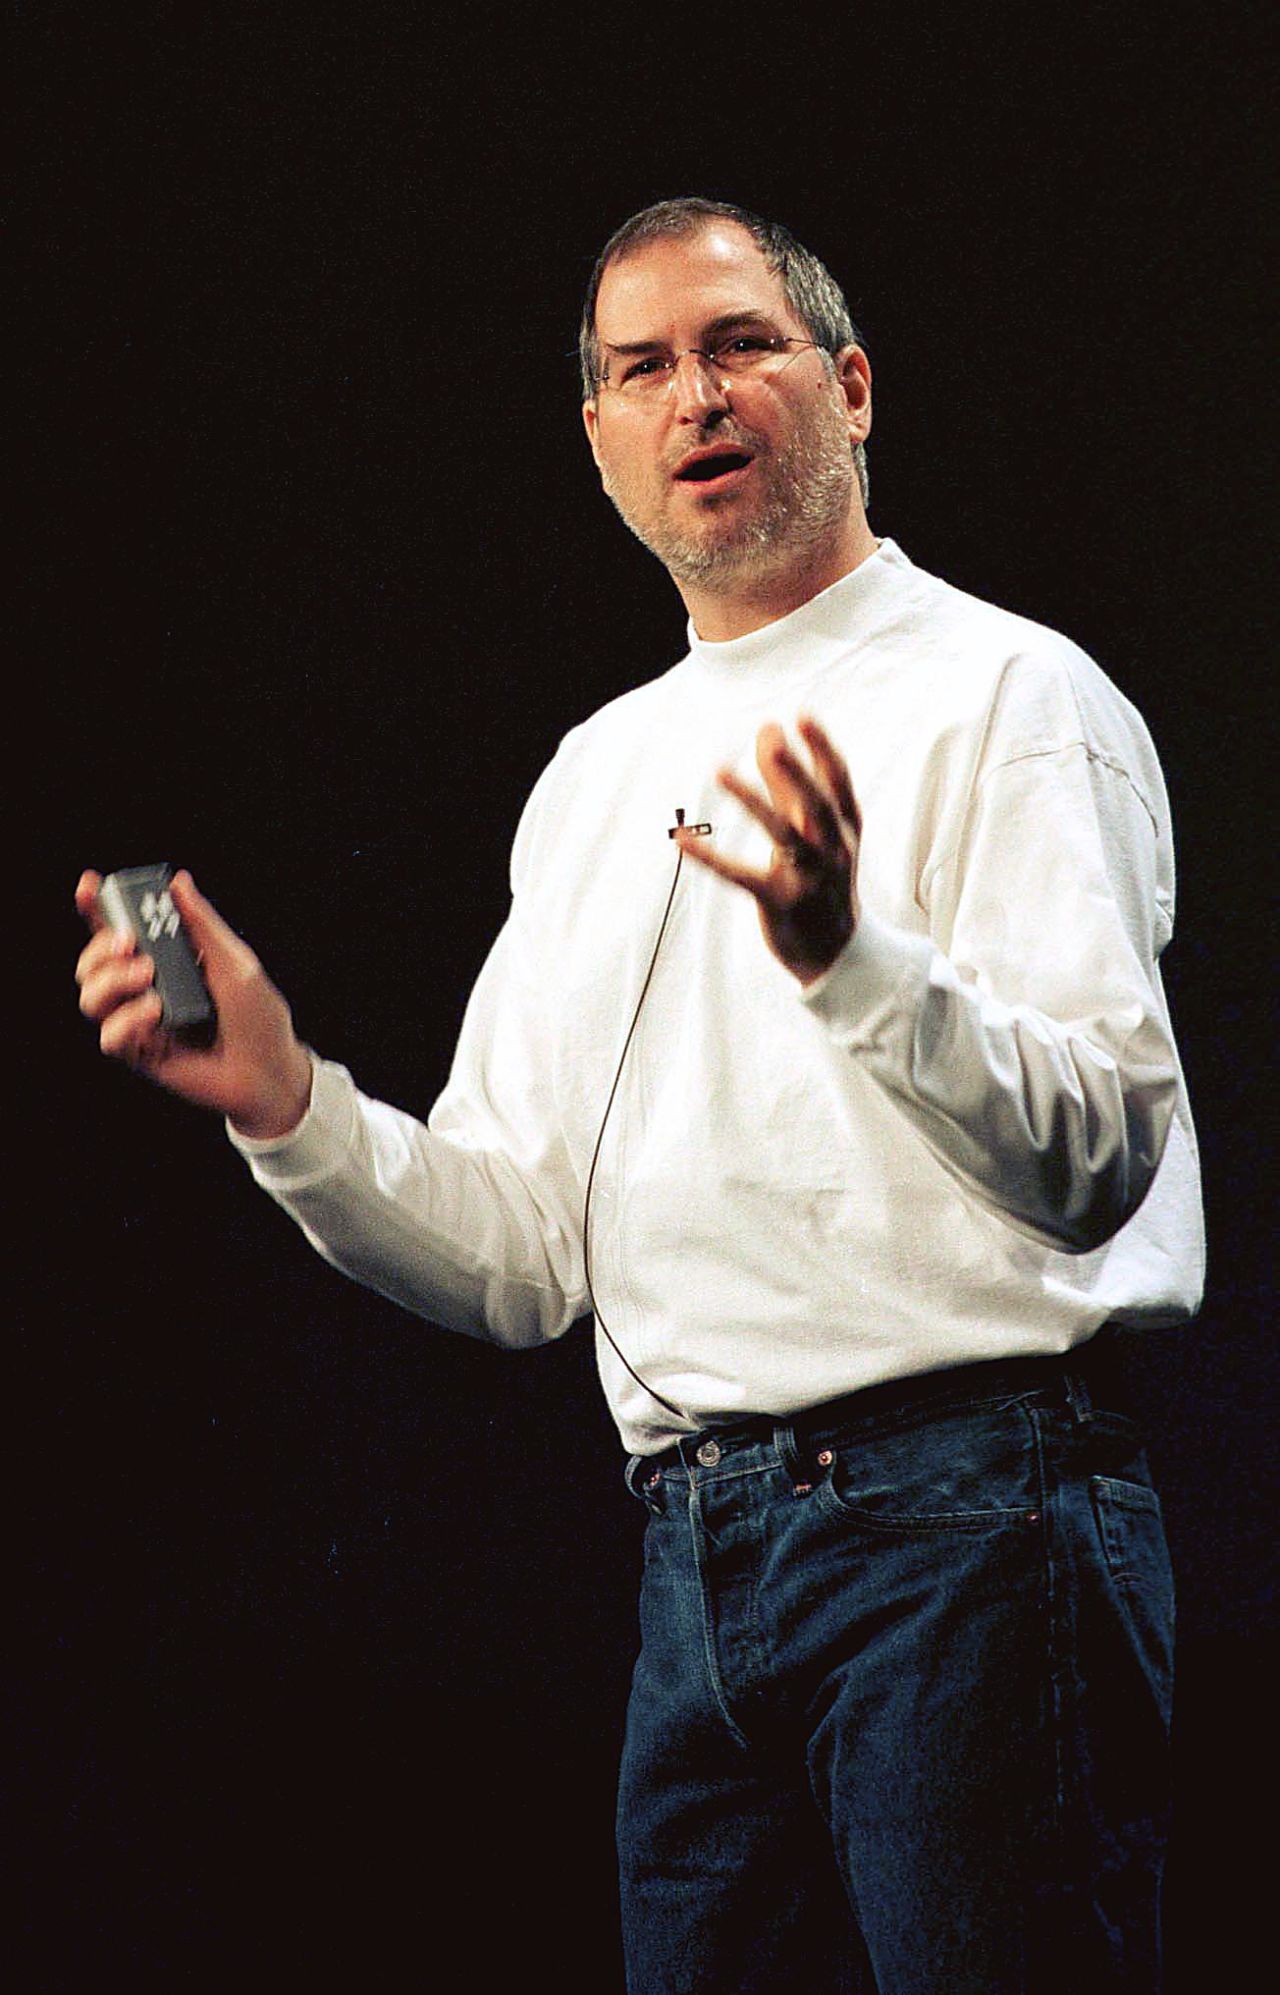 Steve Jobs, then Apple's interim CEO, gave the keynote address in May 1999 at the WWDC, typically a launching pad for products. That year Jobs announced a new Powerbook computer.